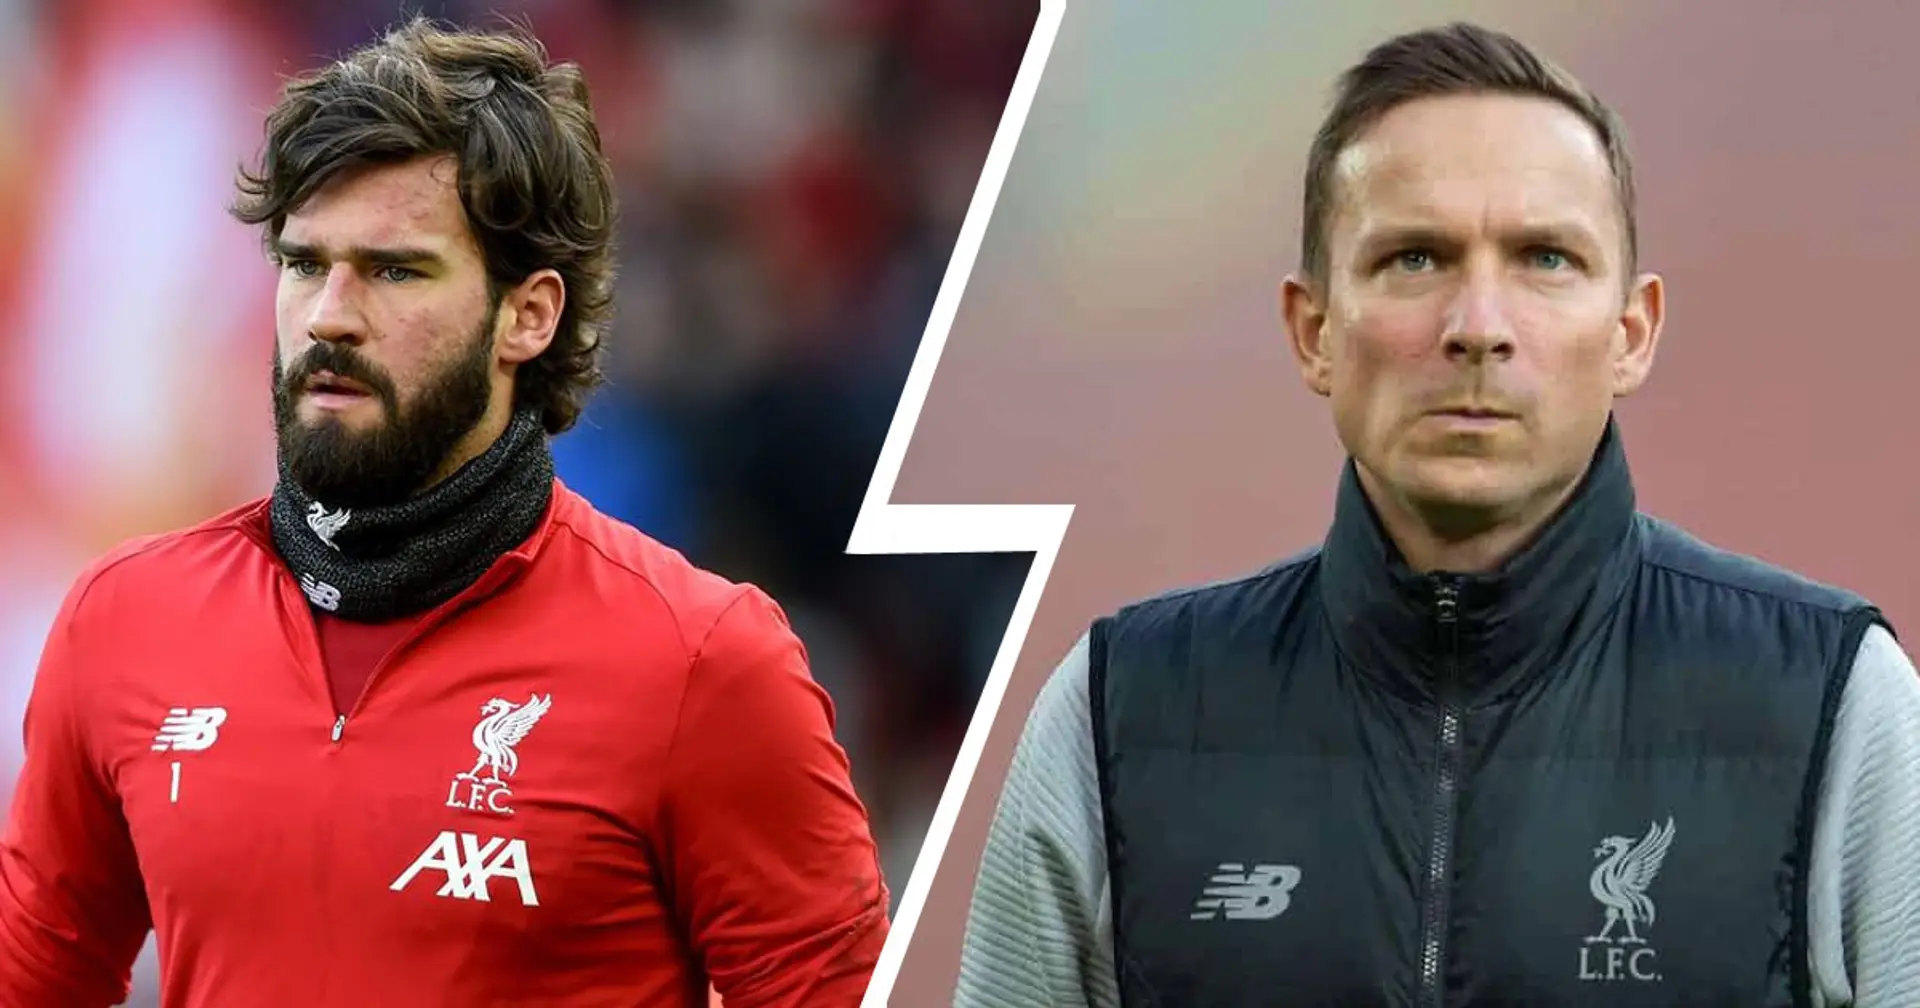 'When he speaks, he speaks the right things': Liverpool assistant Lijnders praises Alisson's humility